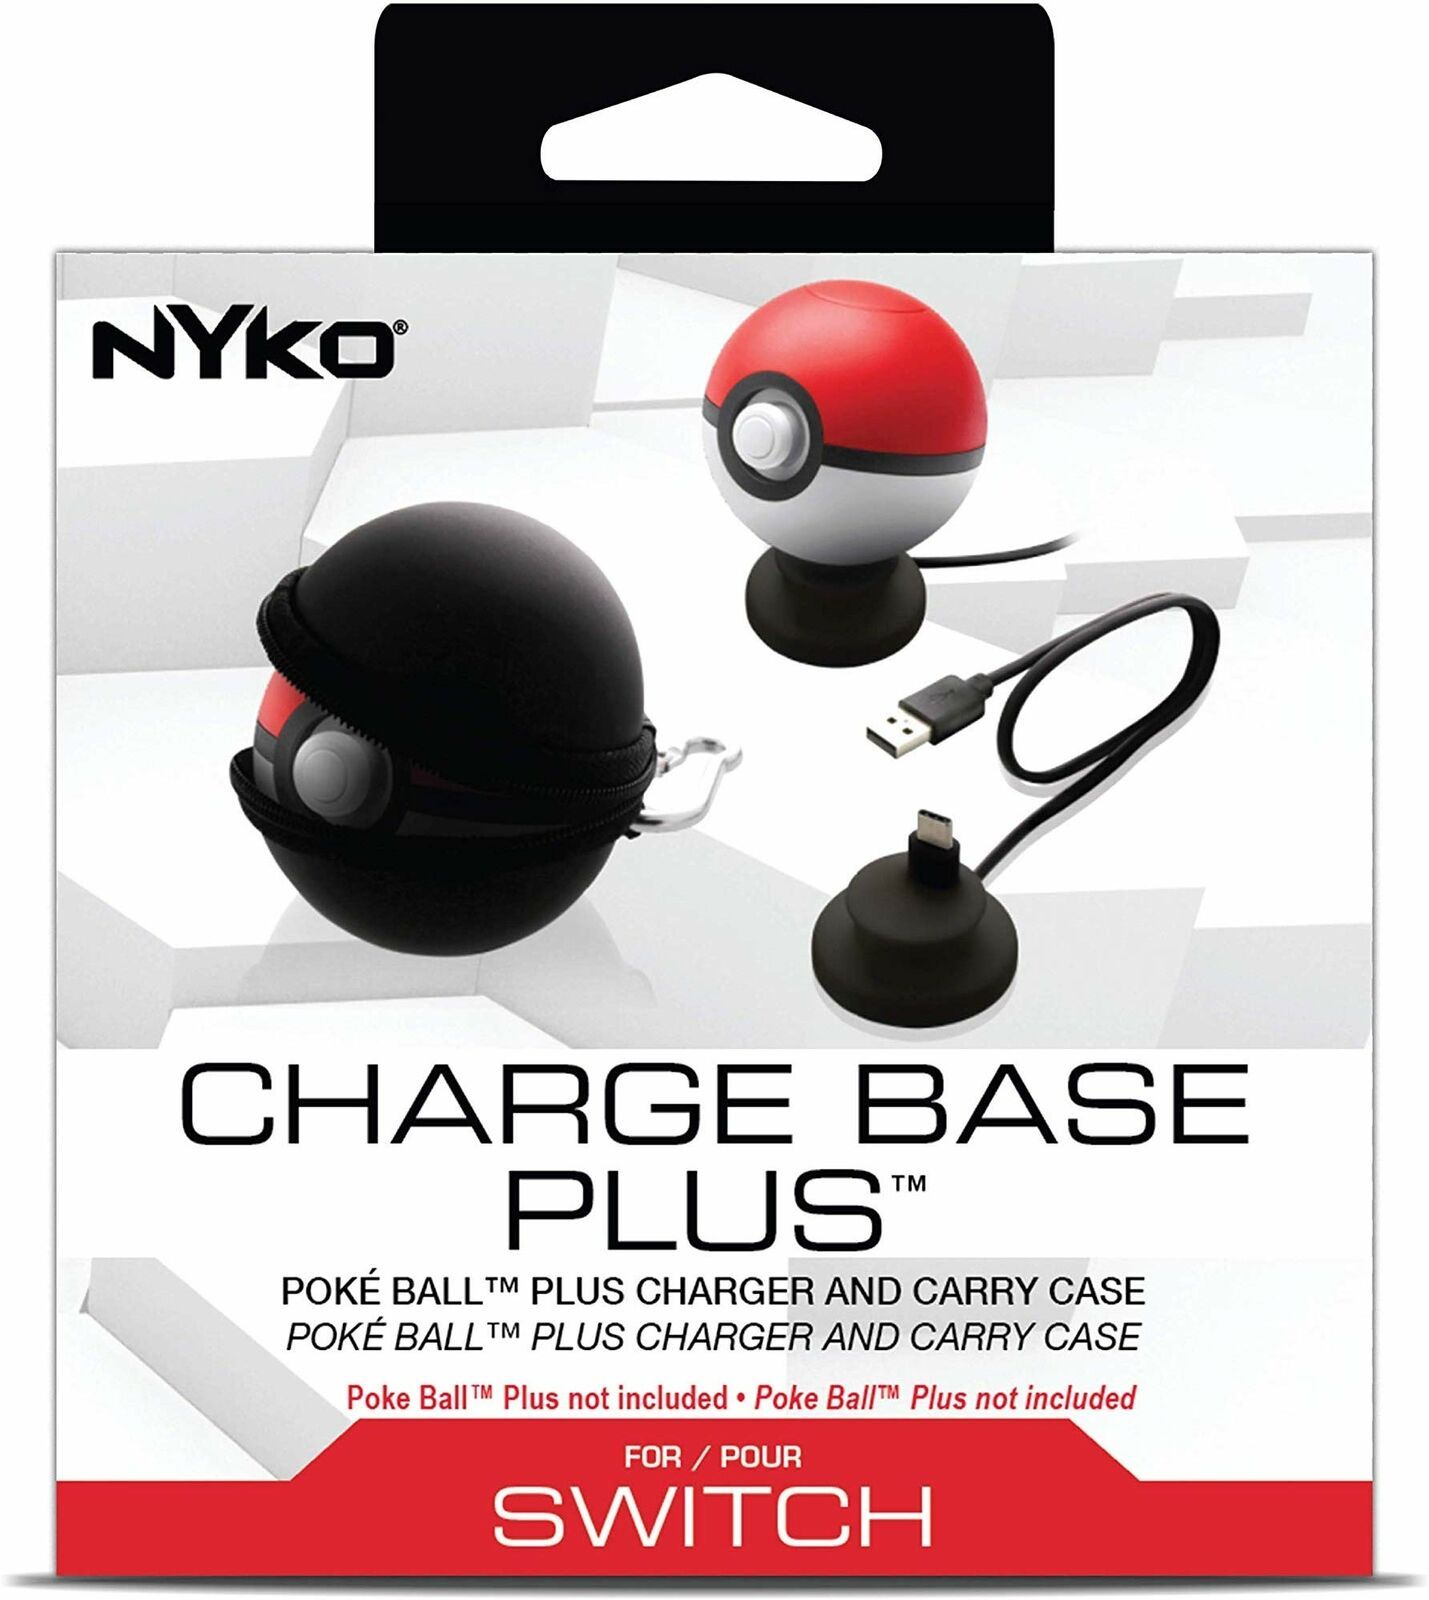 Nyko Charge Base Plus - USB Type C Charging Dock and Carrying Case for Poke Ball - $36.99